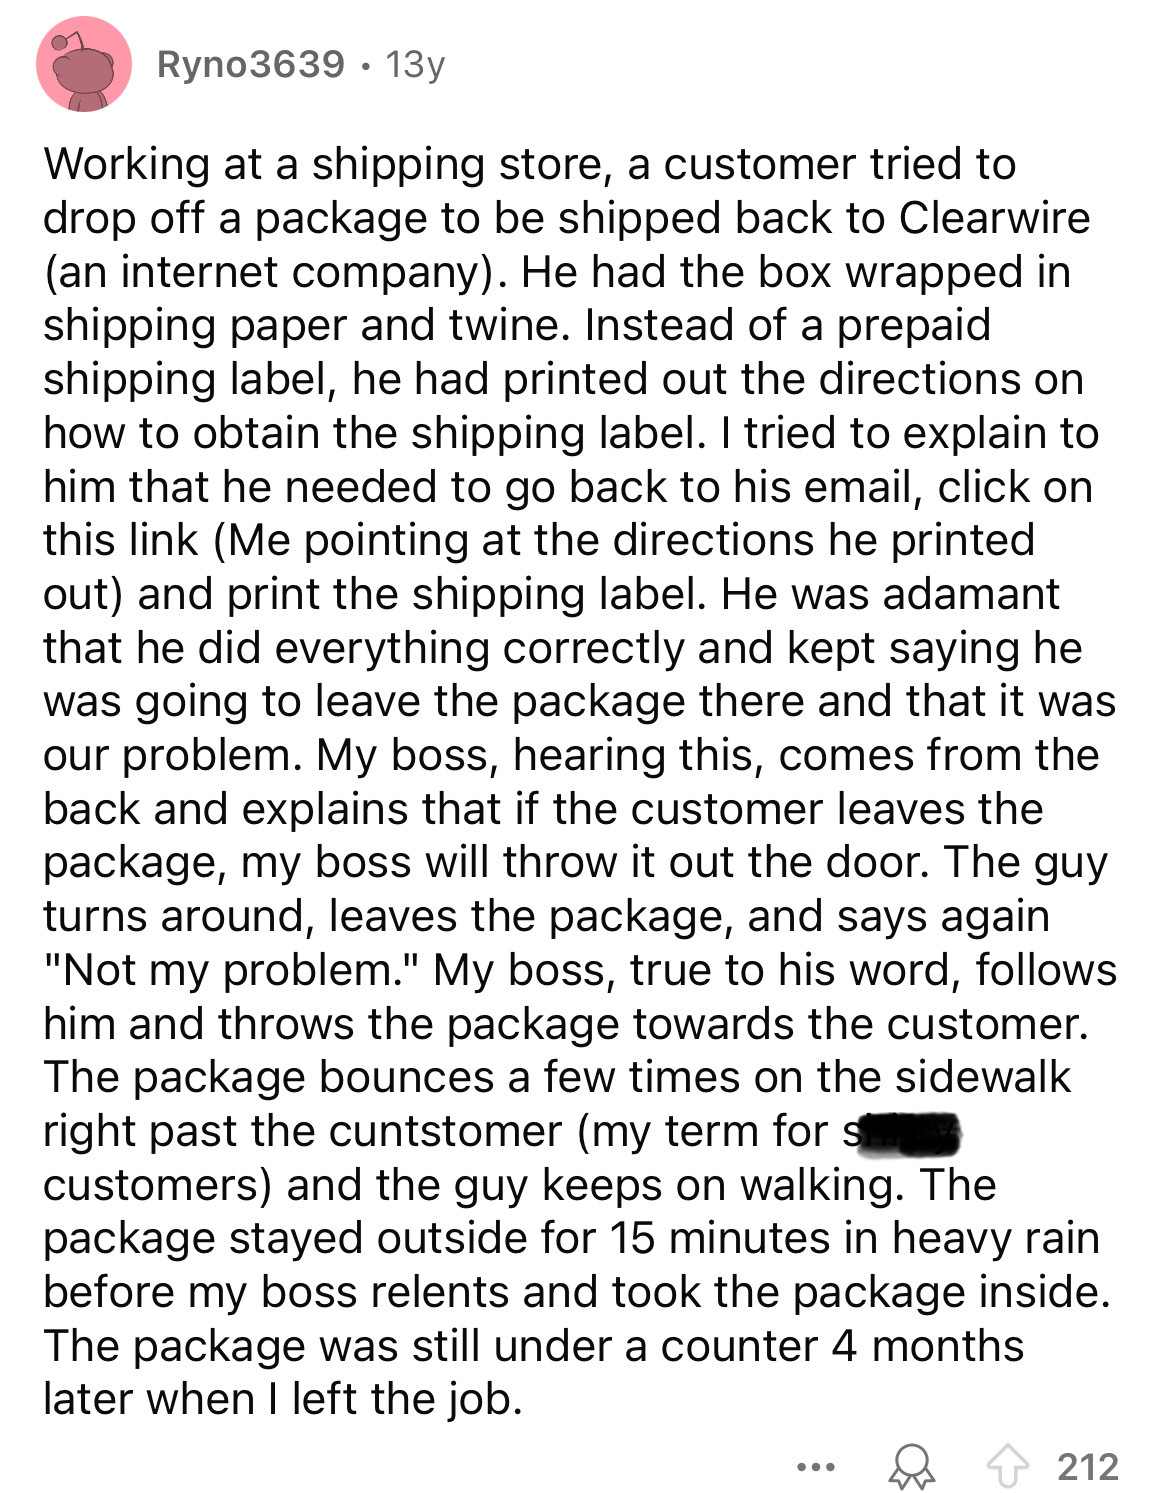 document - Ryno3639 13y Working at a shipping store, a customer tried to drop off a package to be shipped back to Clearwire an internet company. He had the box wrapped in shipping paper and twine. Instead of a prepaid shipping label, he had printed out th